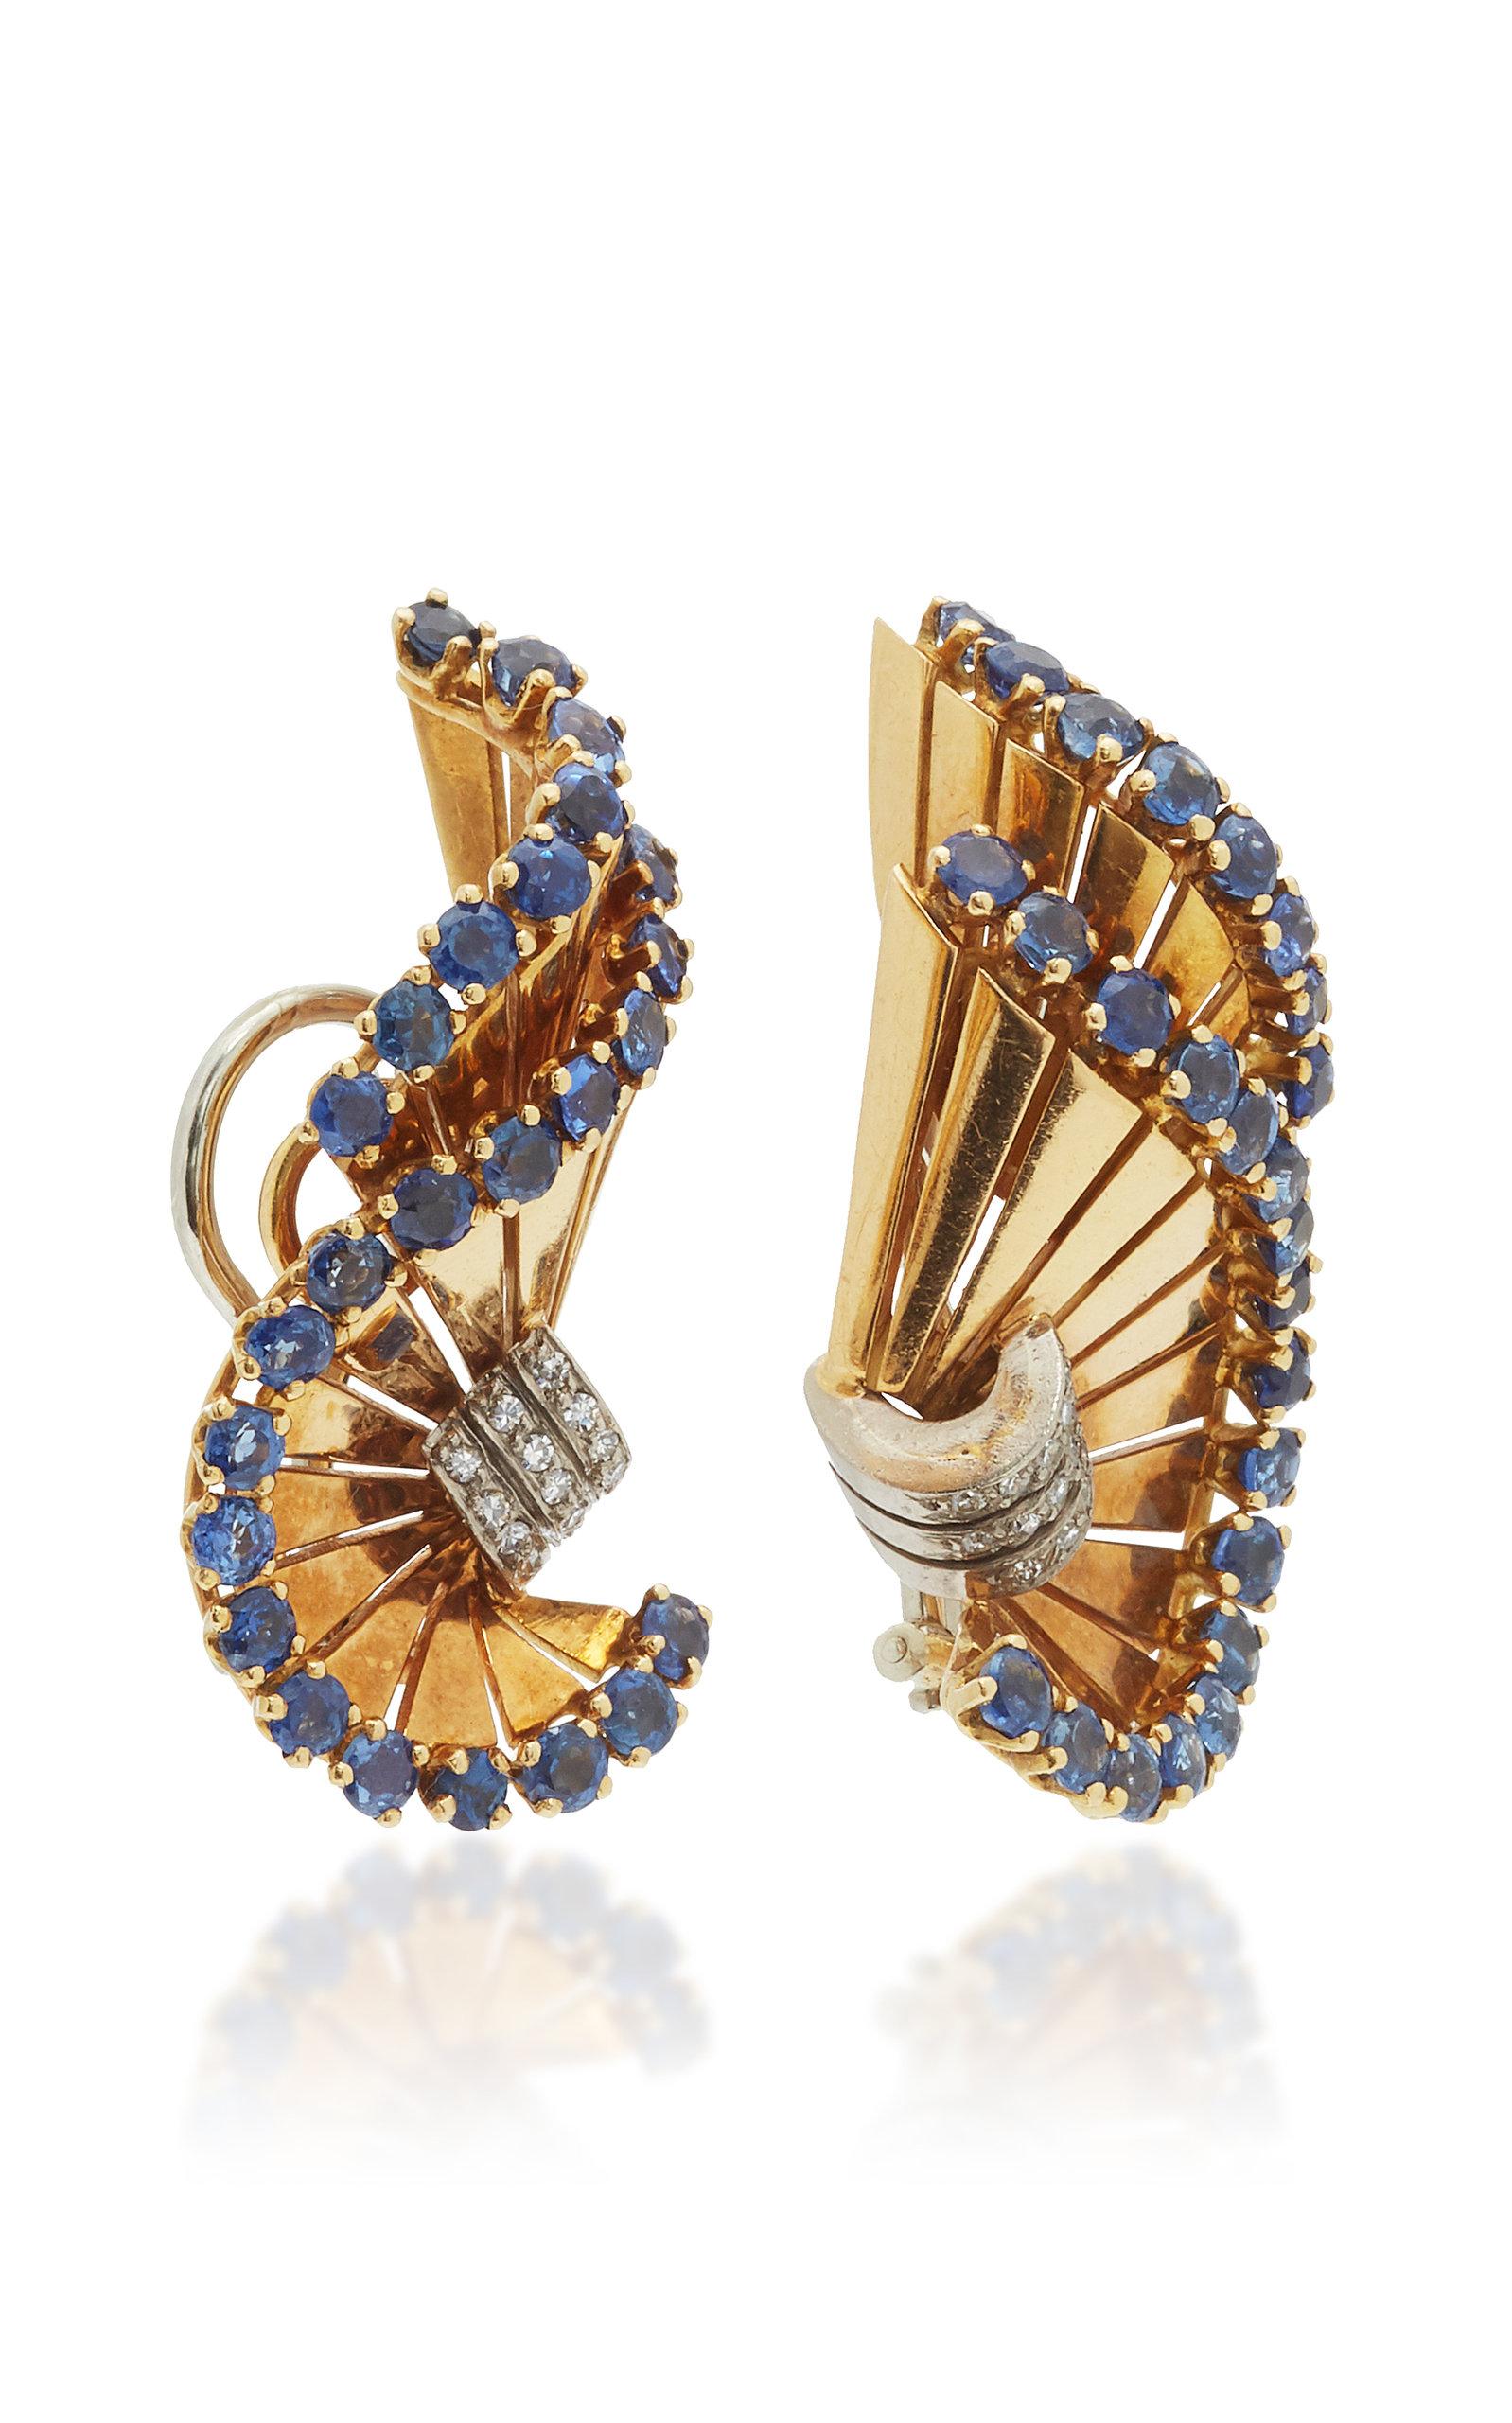 A pair of Retro 18kt yellow gold ear-clips of swirl design, embellished with sapphires and diamonds. By Gubelin, made in Switzerland, circa 1955.